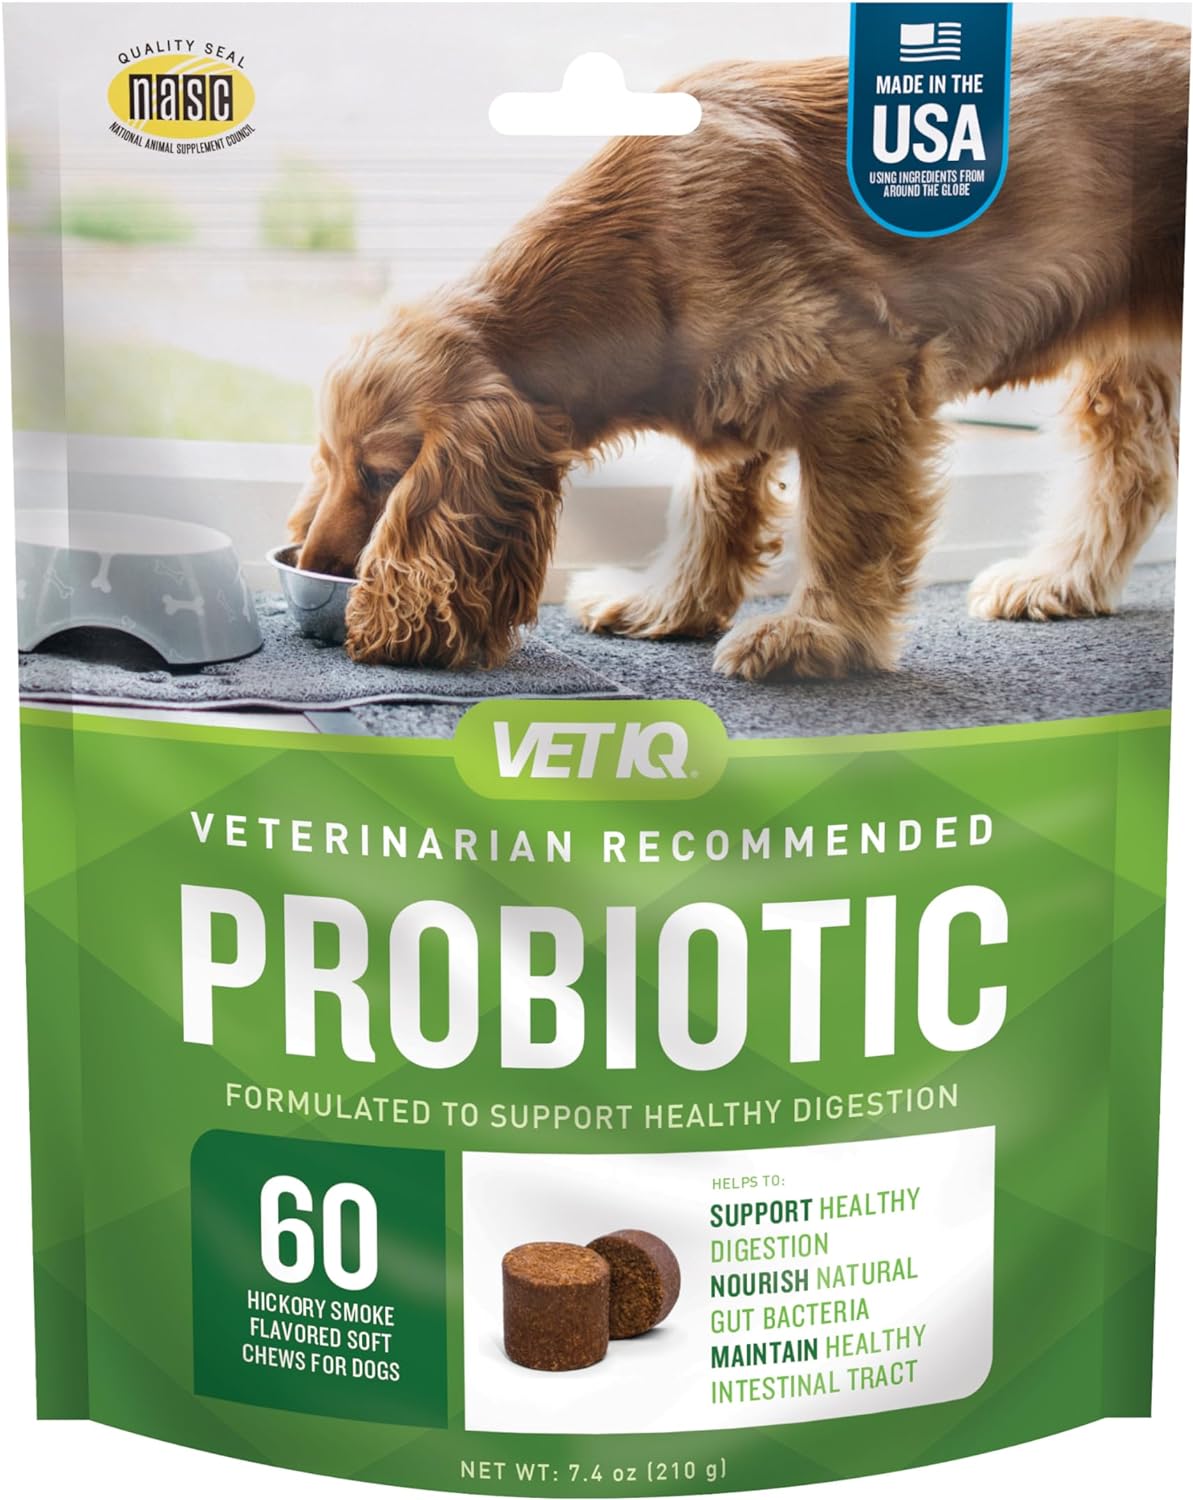 VetIQ Probiotic Supplement for Dogs, Digestive Support for Dogs, Nourishes Gut Bacteria and Supports Bowel Function, Hickory Smoke Flavor, Made in The USA, 60 Count